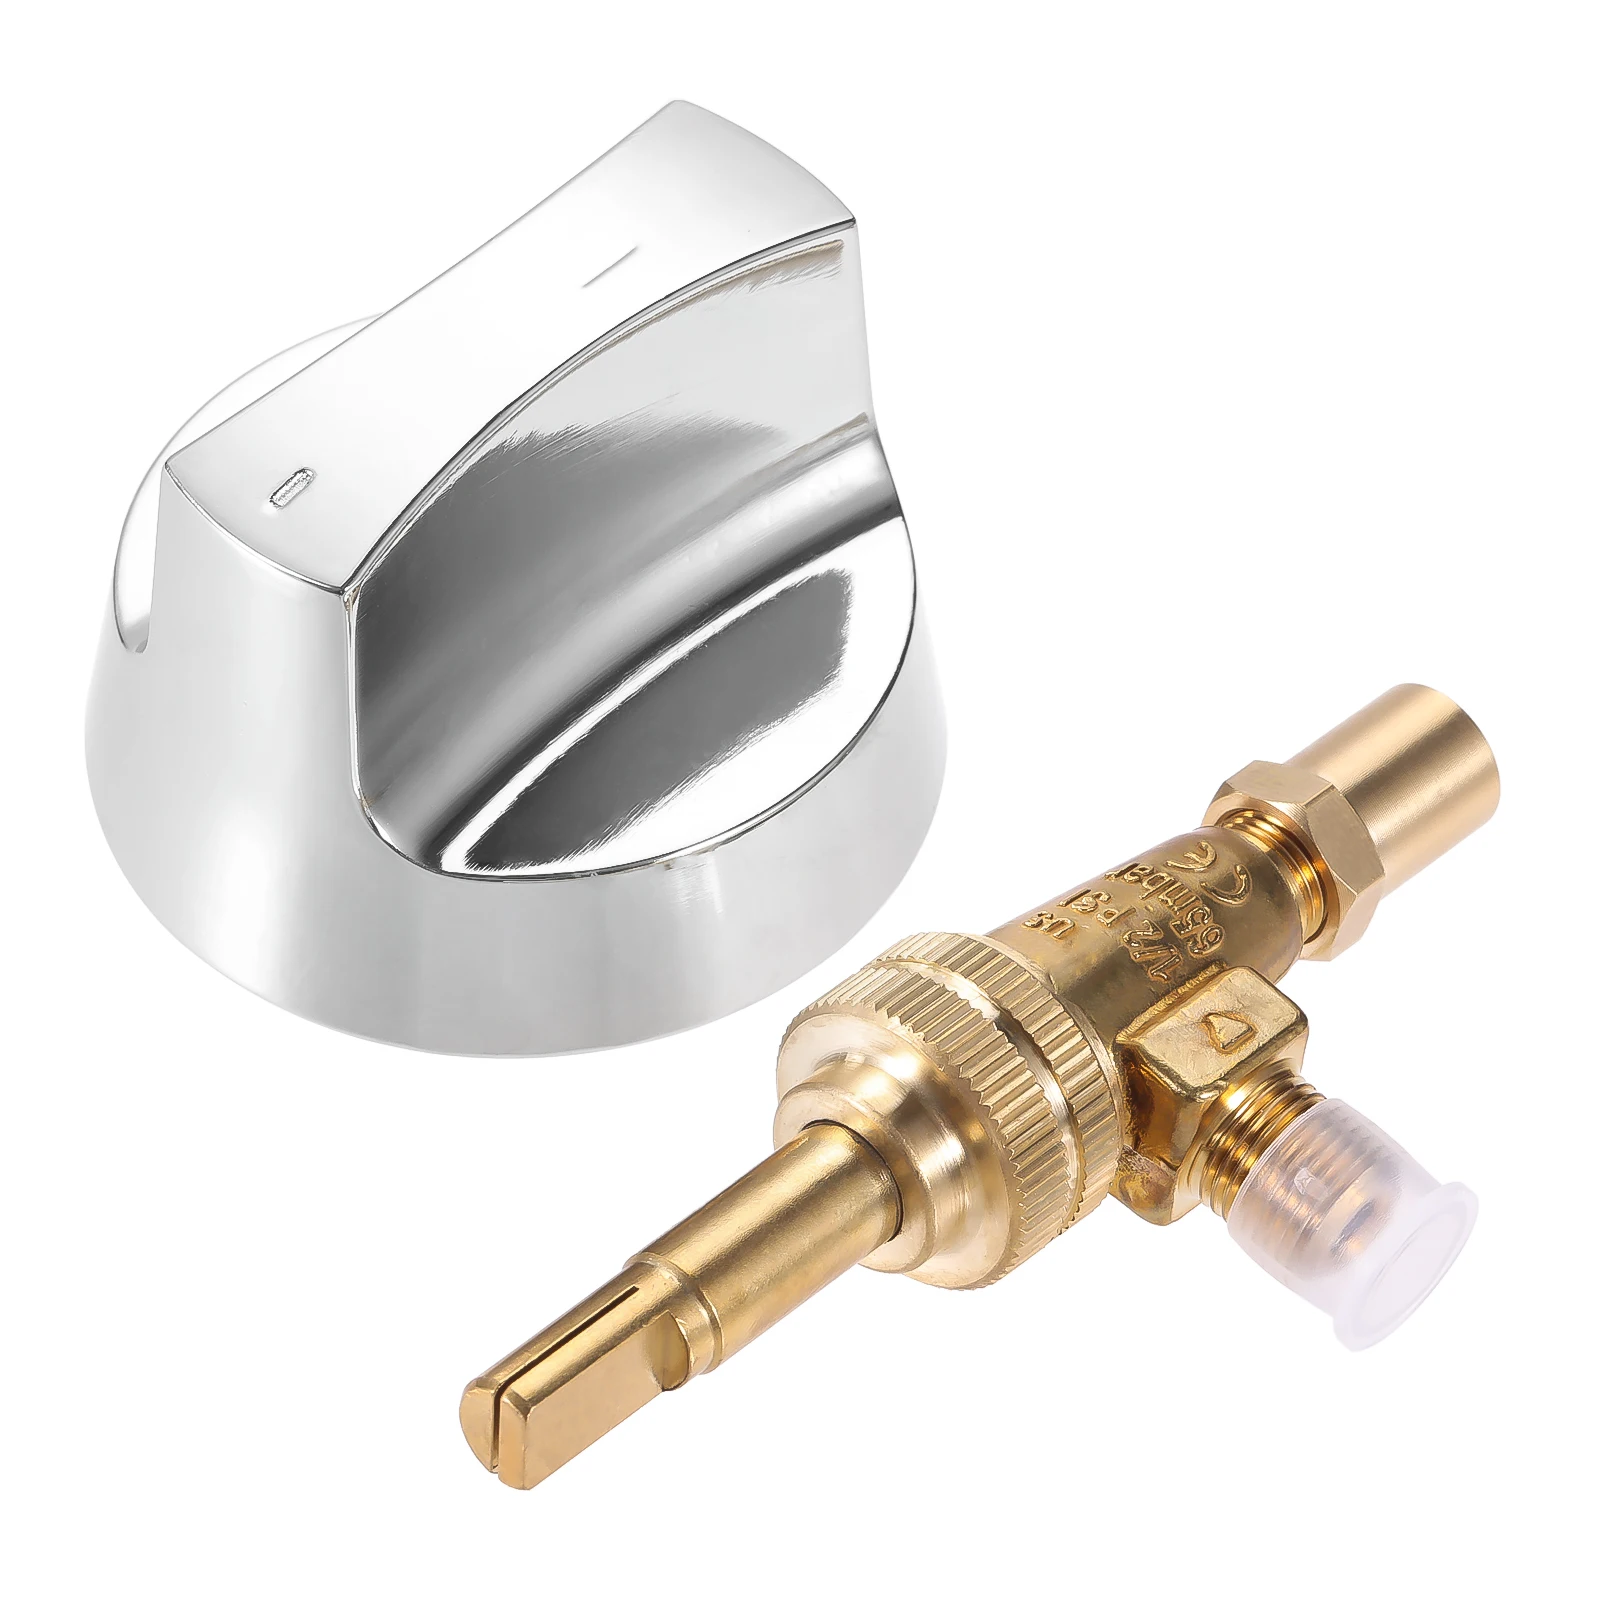 

Propane Natural Brass Gas Control Valve 0.047" Orfice with Chromed Steel Control Knob Stem Length 1.4" for Commercial Kitchen